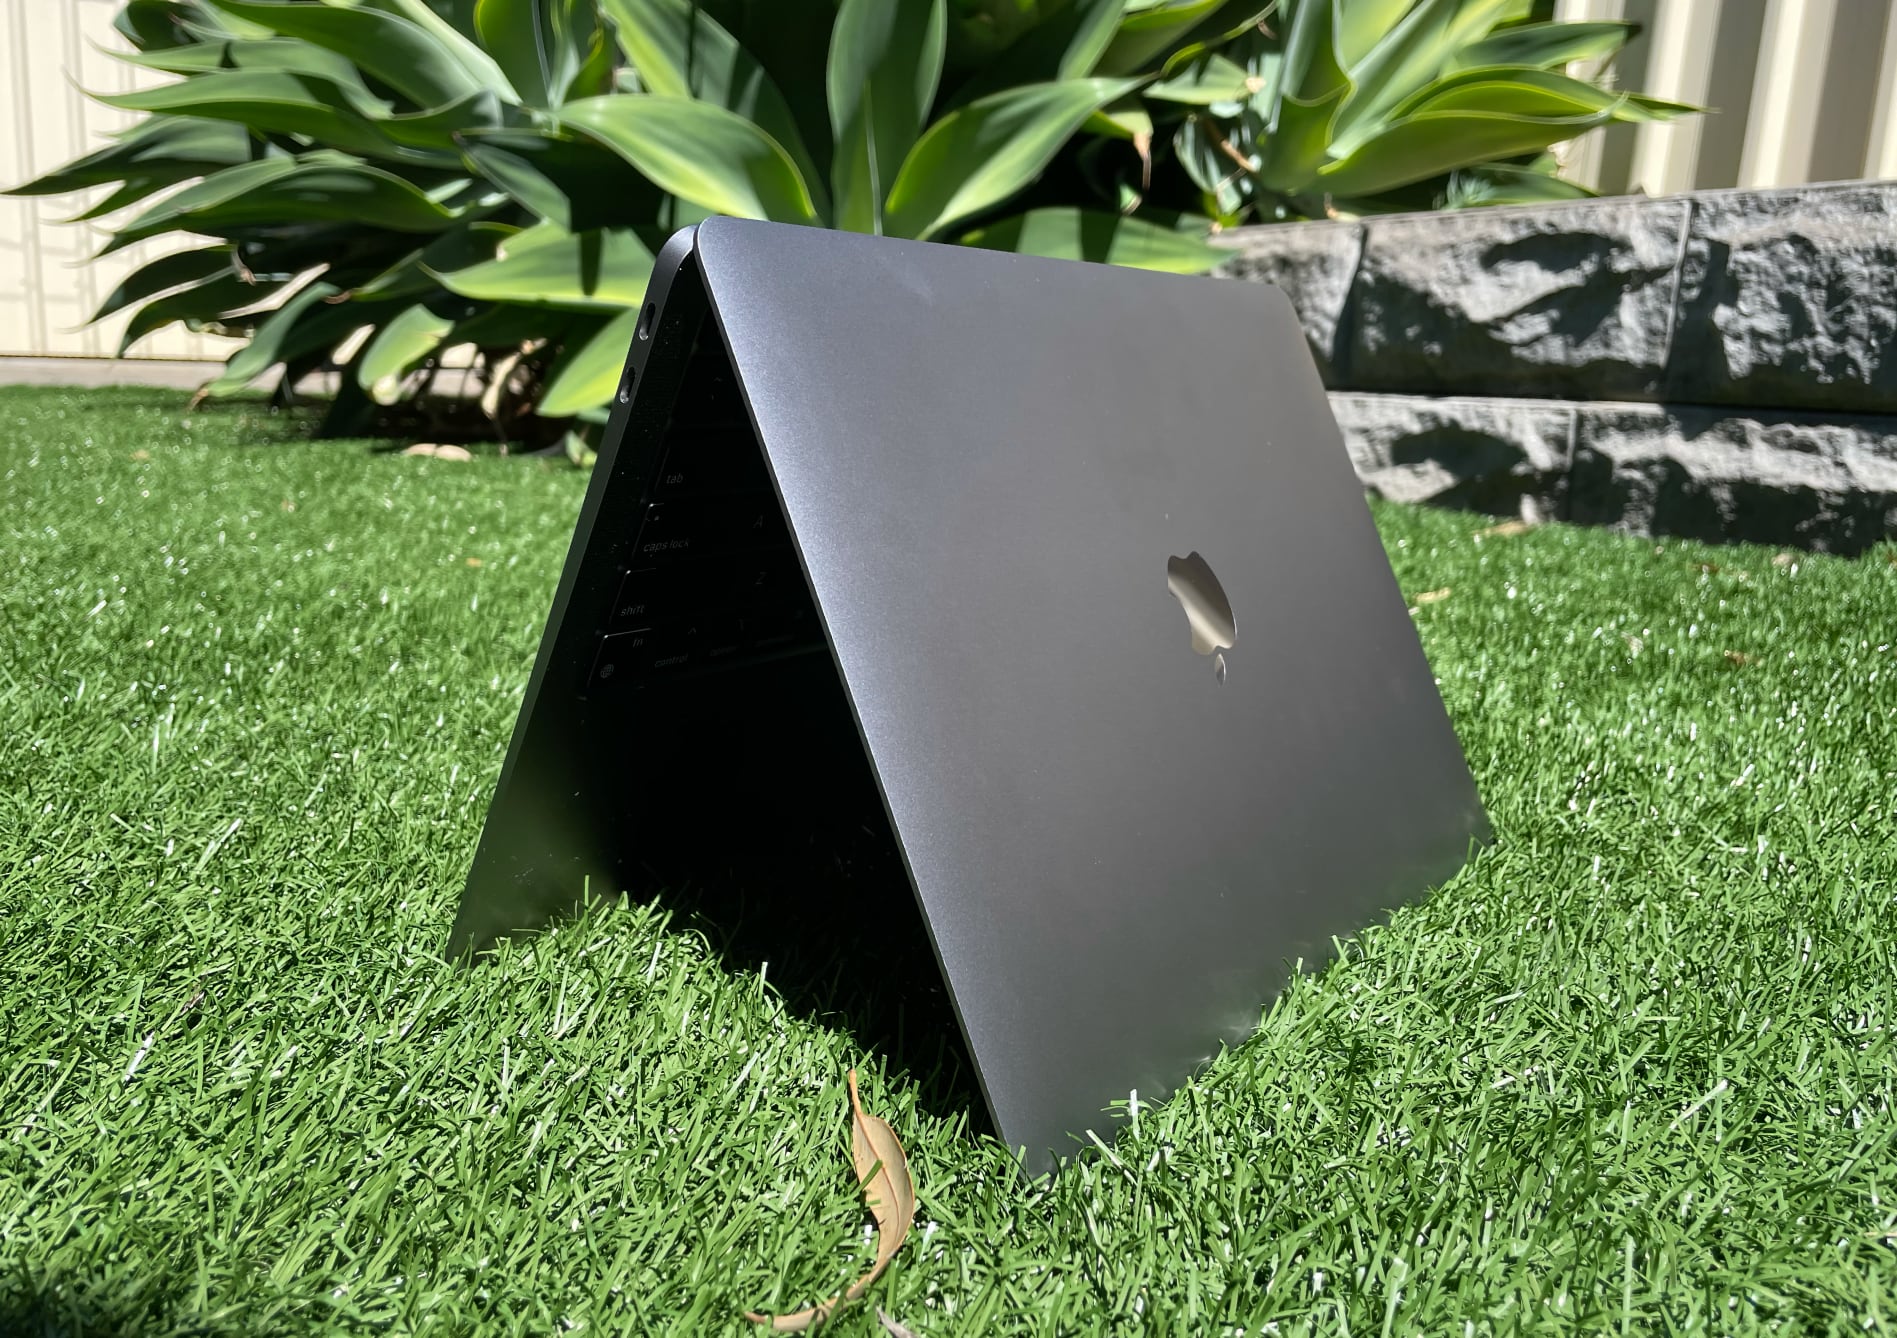 MacBook Air in tent formation on some grass